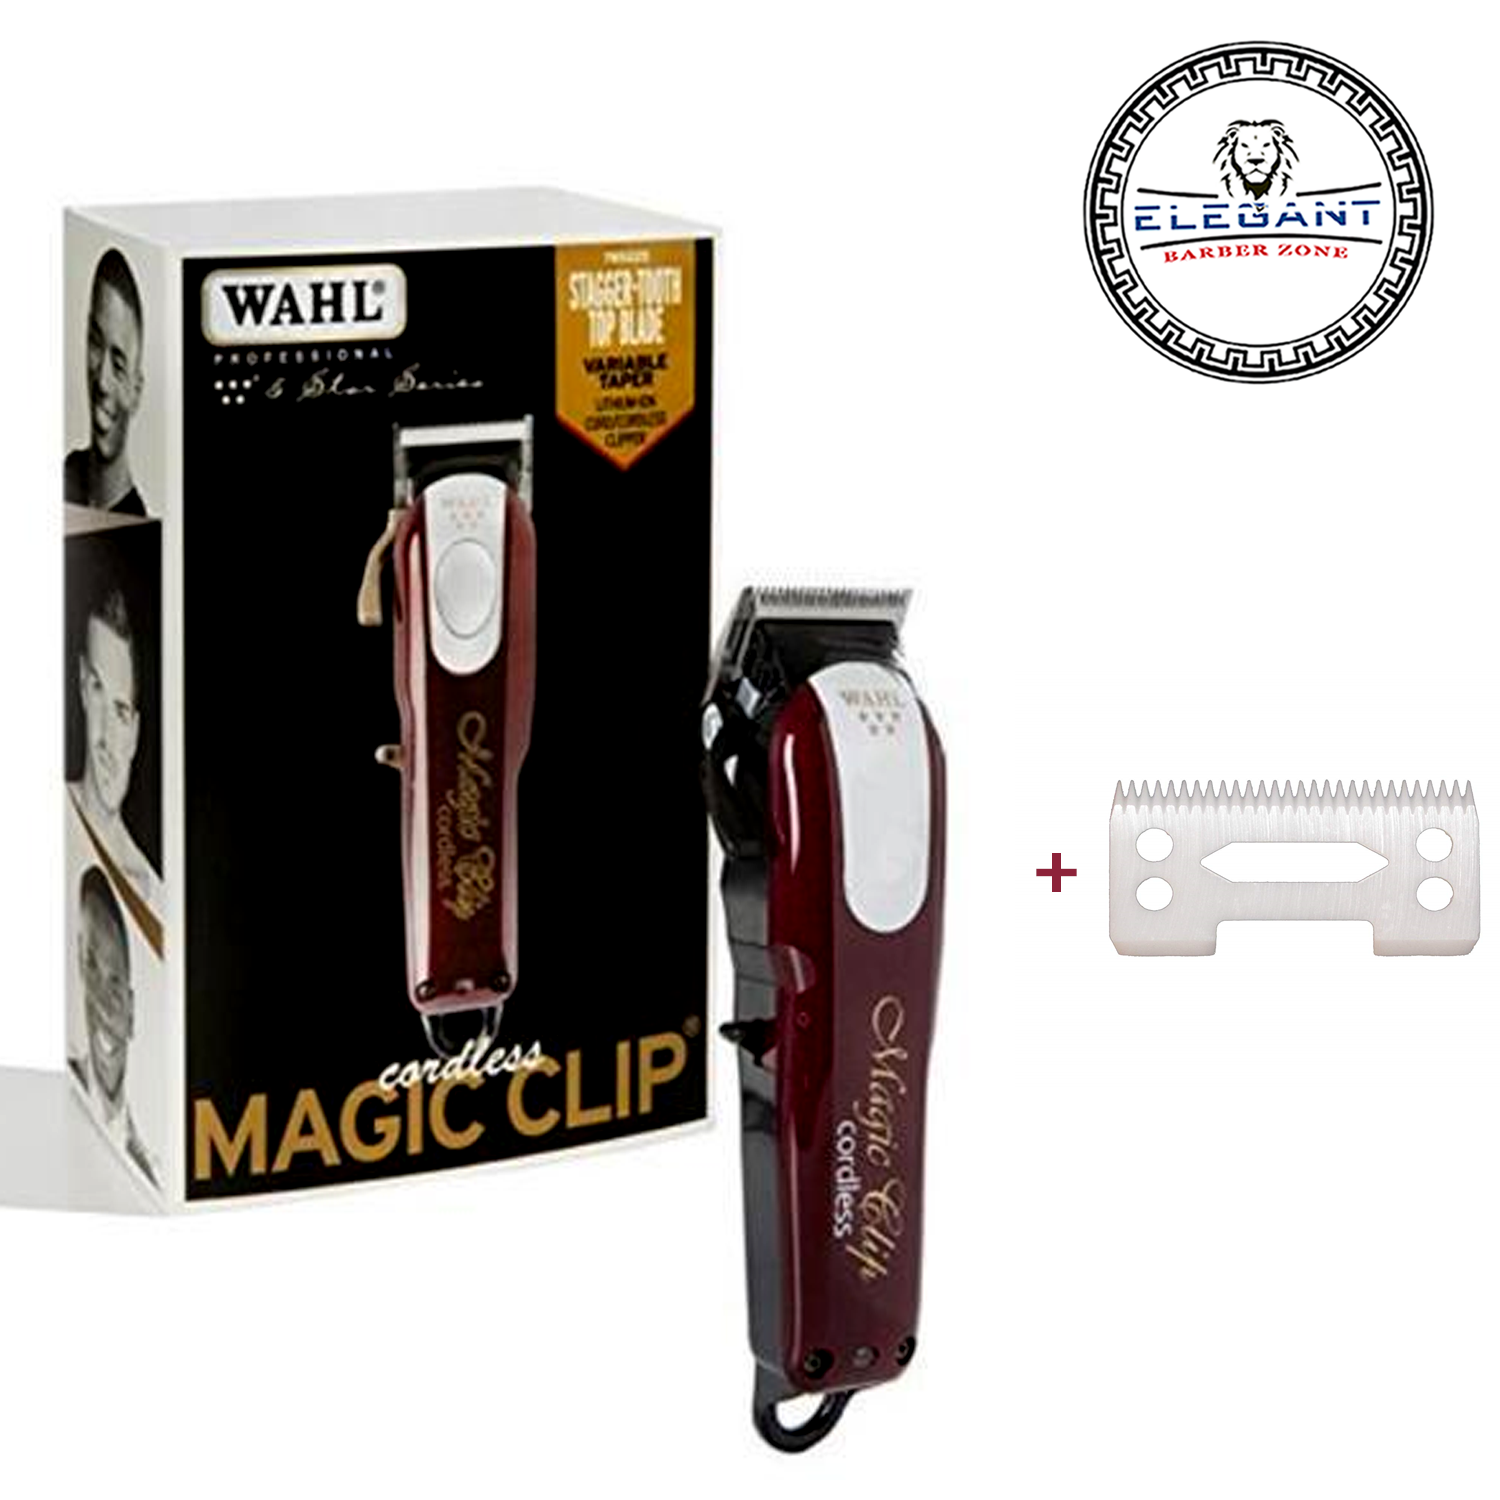 WAHL Professional 5 Star Cordless Magic Clipper with ceramic blade –  Elegant Barber Zone